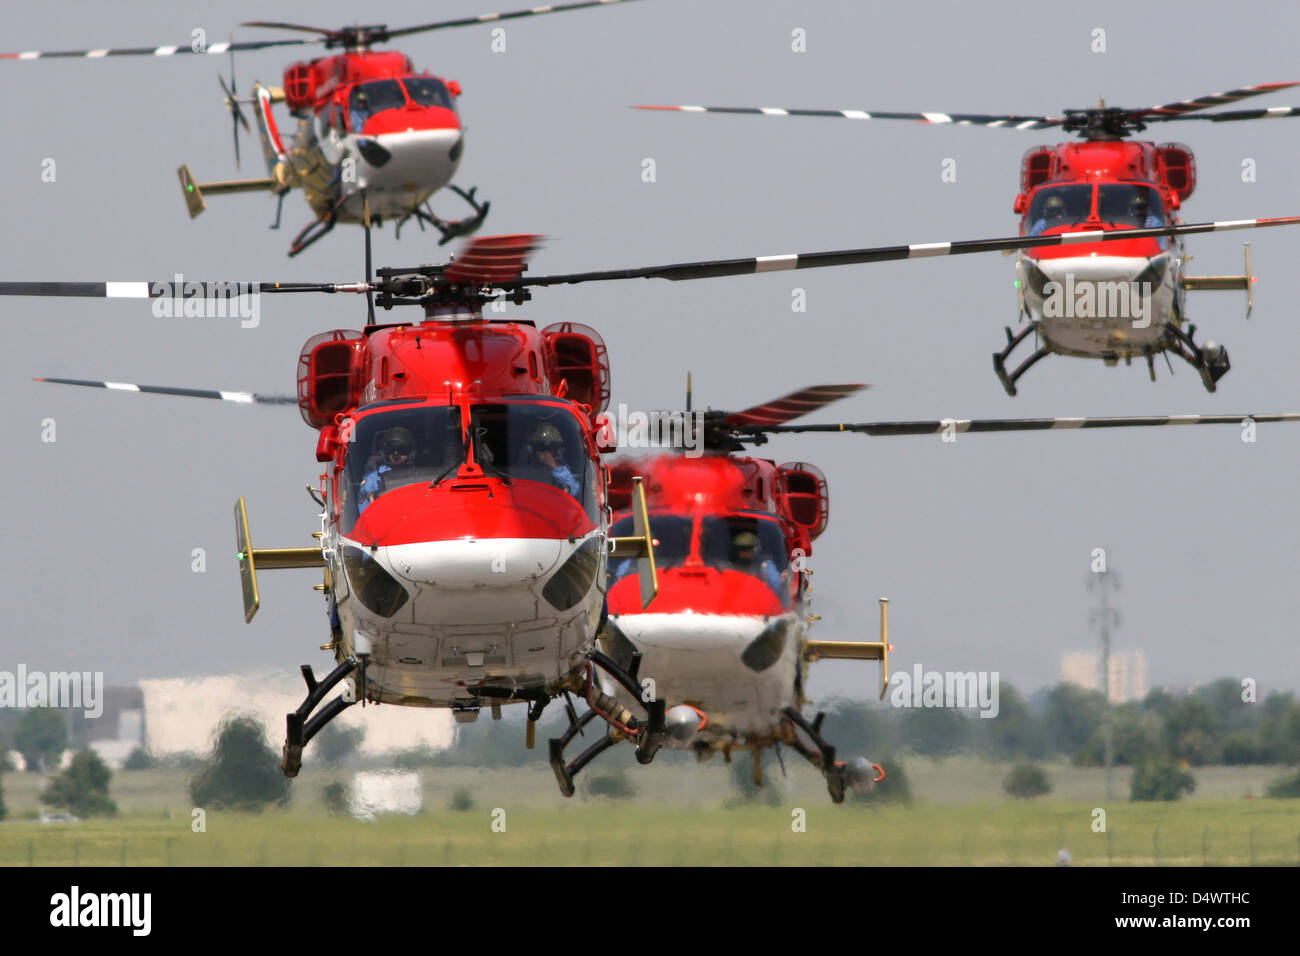 Indian Air Force Dhruv helicopters of the Sarang demo team, Berlin Schonefeld, Germany. Stock Photo